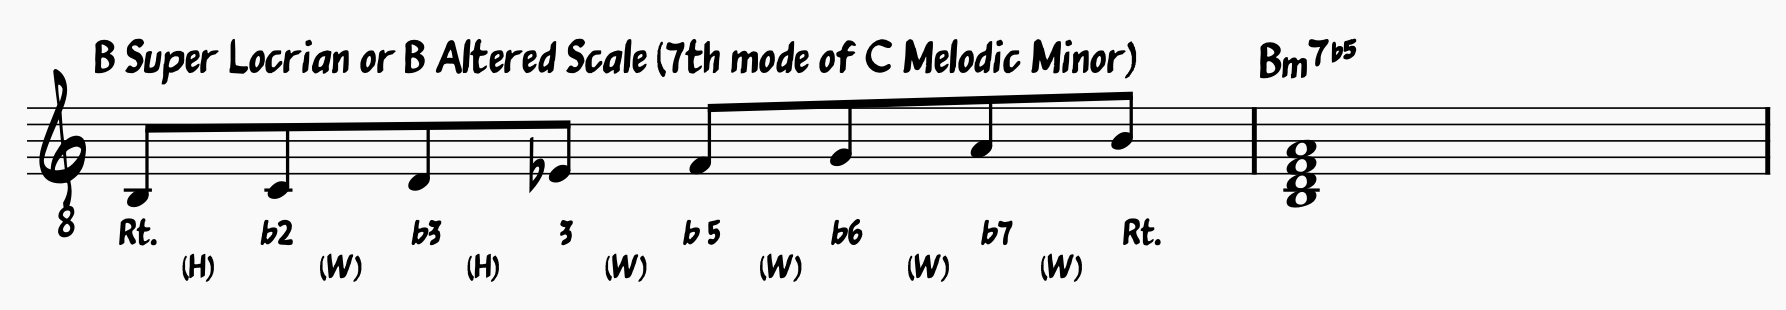 B Super-Locrian or Altered Scale showing notation, steps, and essential chord tones